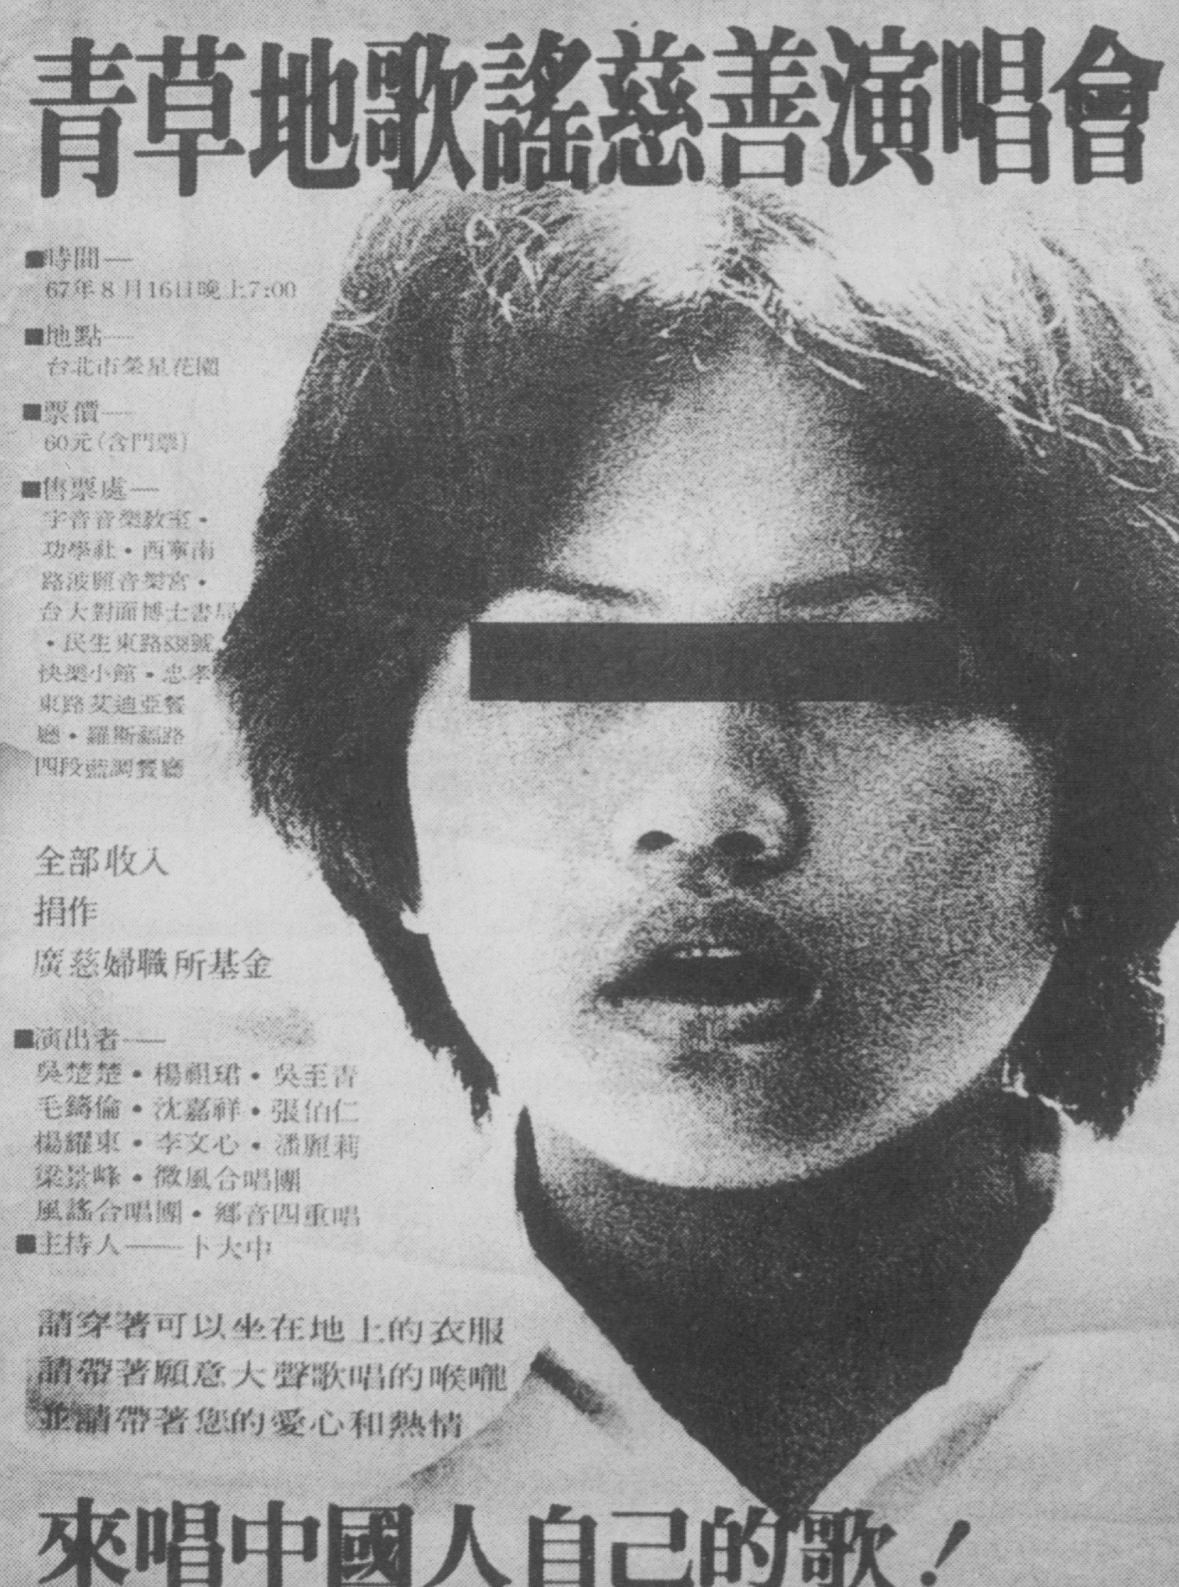 A poster from the Grass Field Charity Concert (青草地歌謠慈善演唱會), Taipei, 1978.